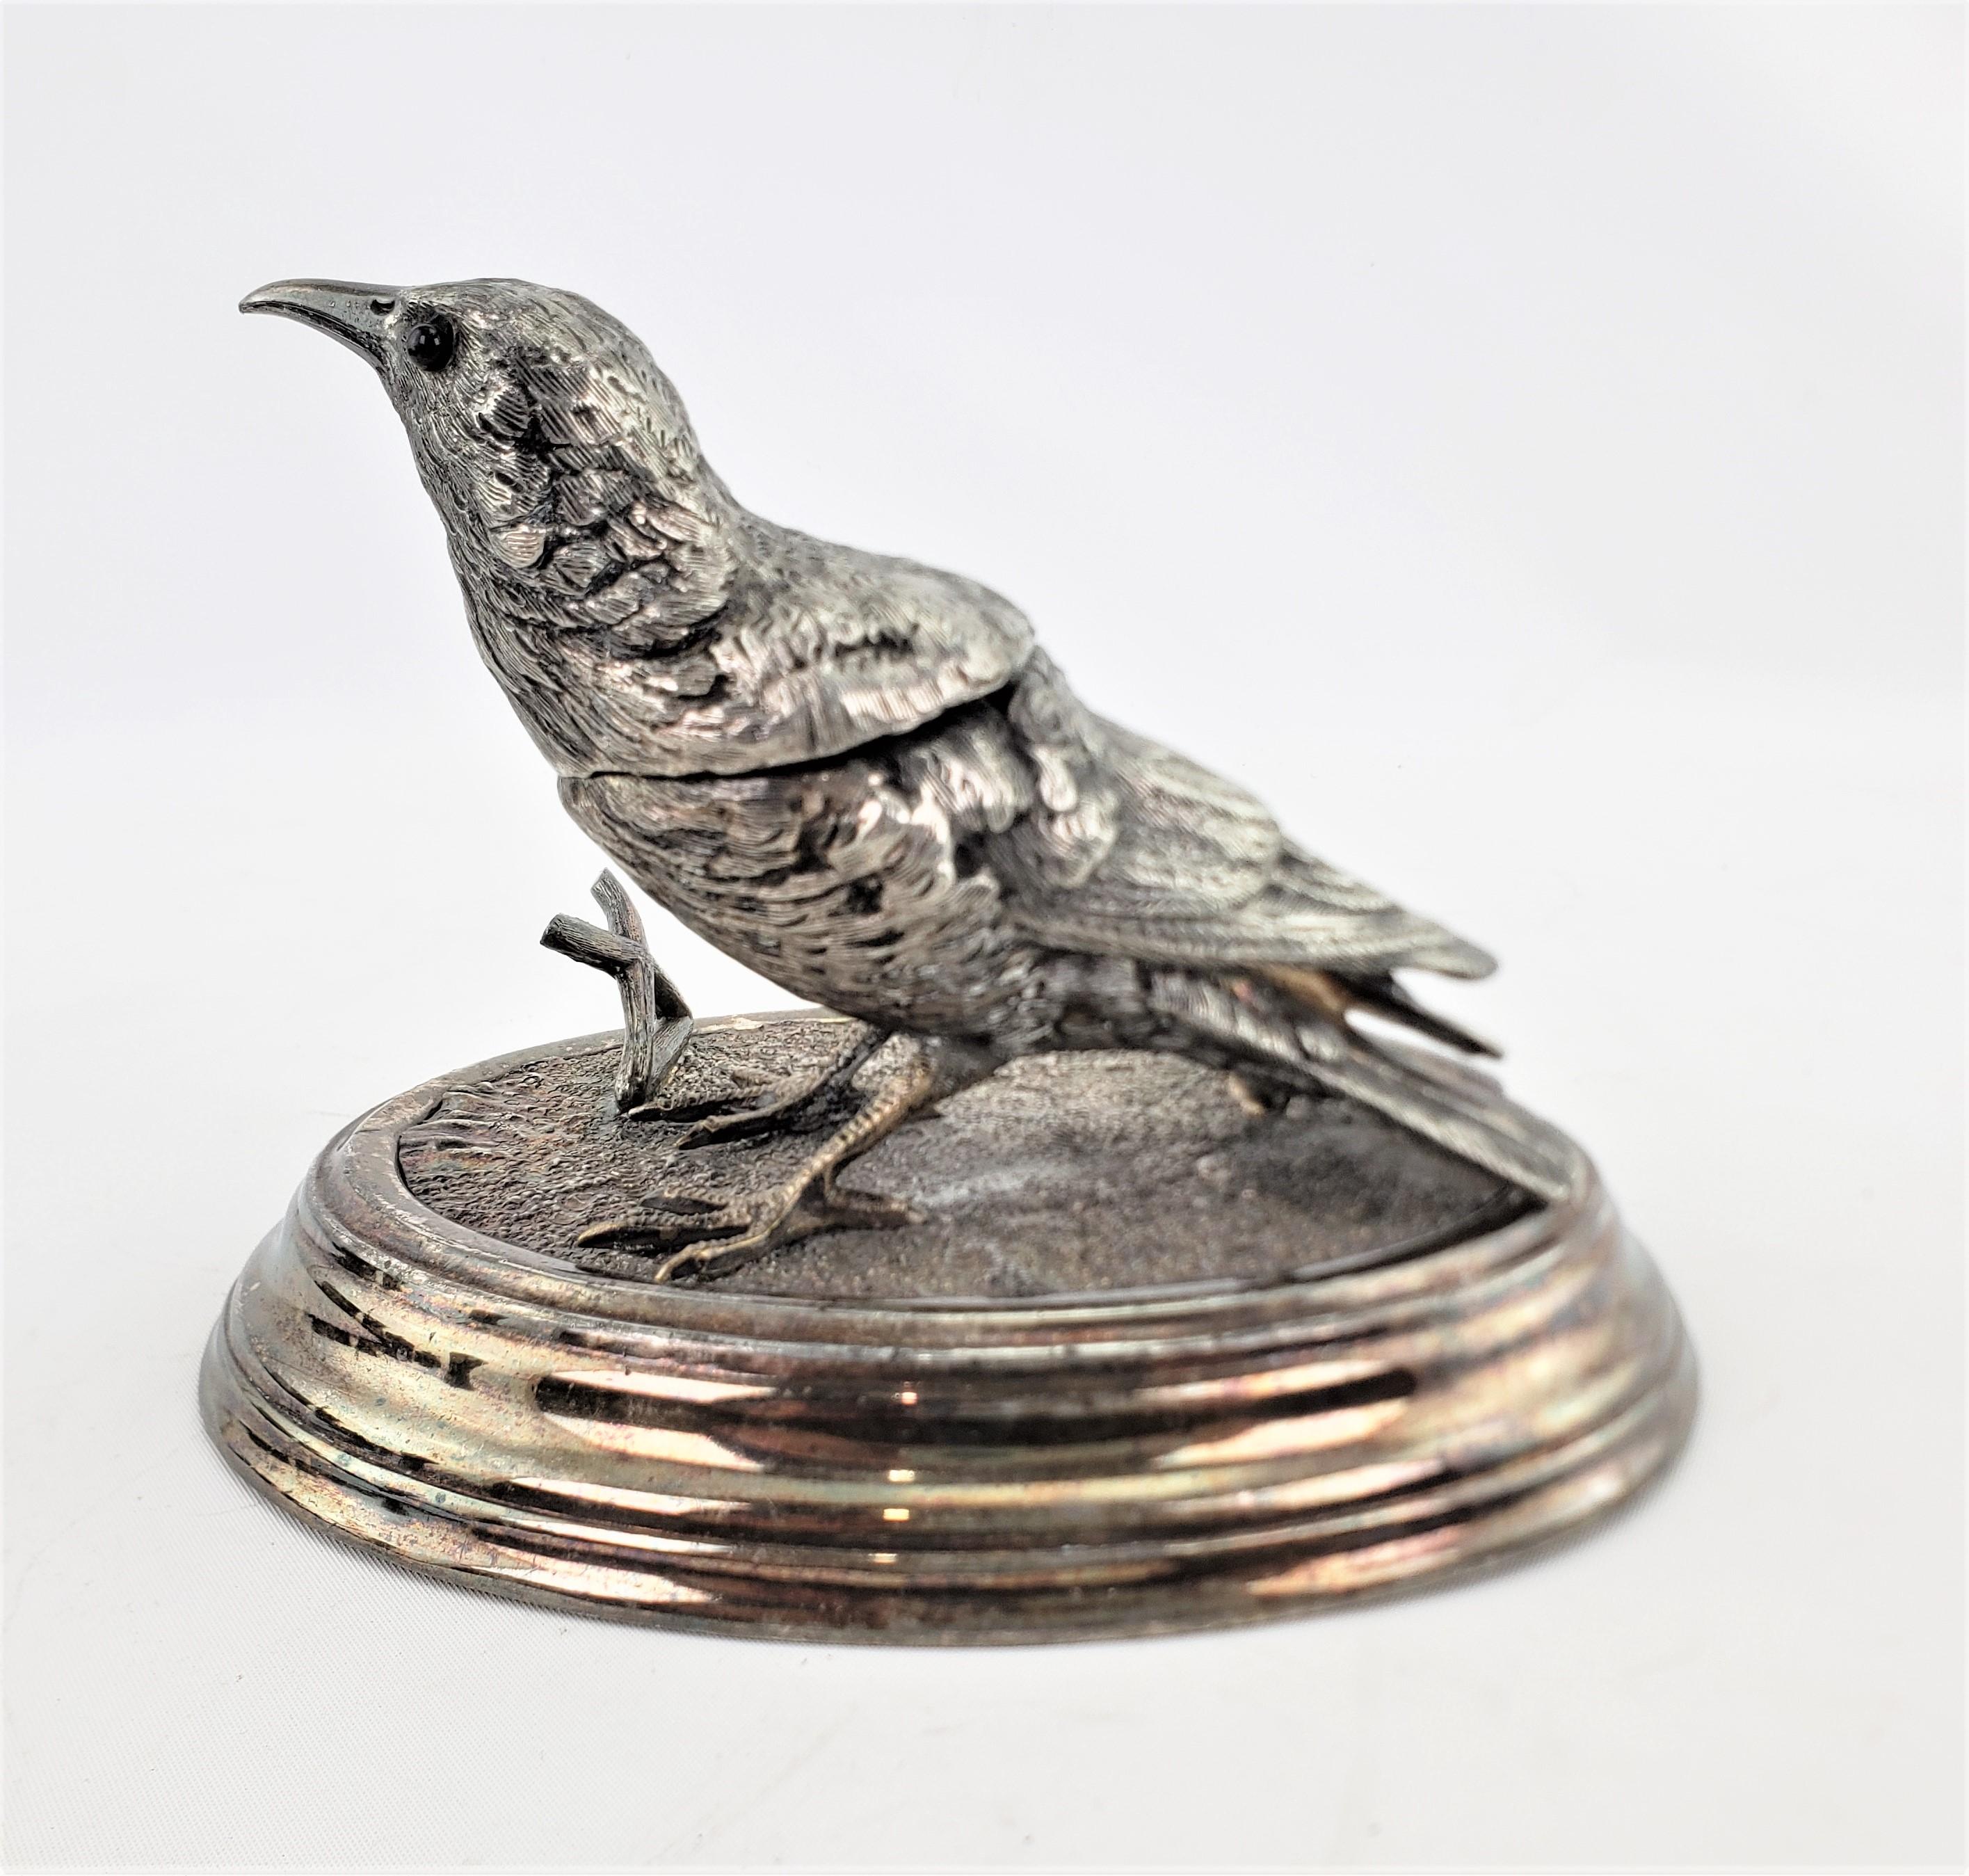 Copper Antique Ornately Cast & Silver Plated Figural Bird Inkwell & Pen Holder or Rest